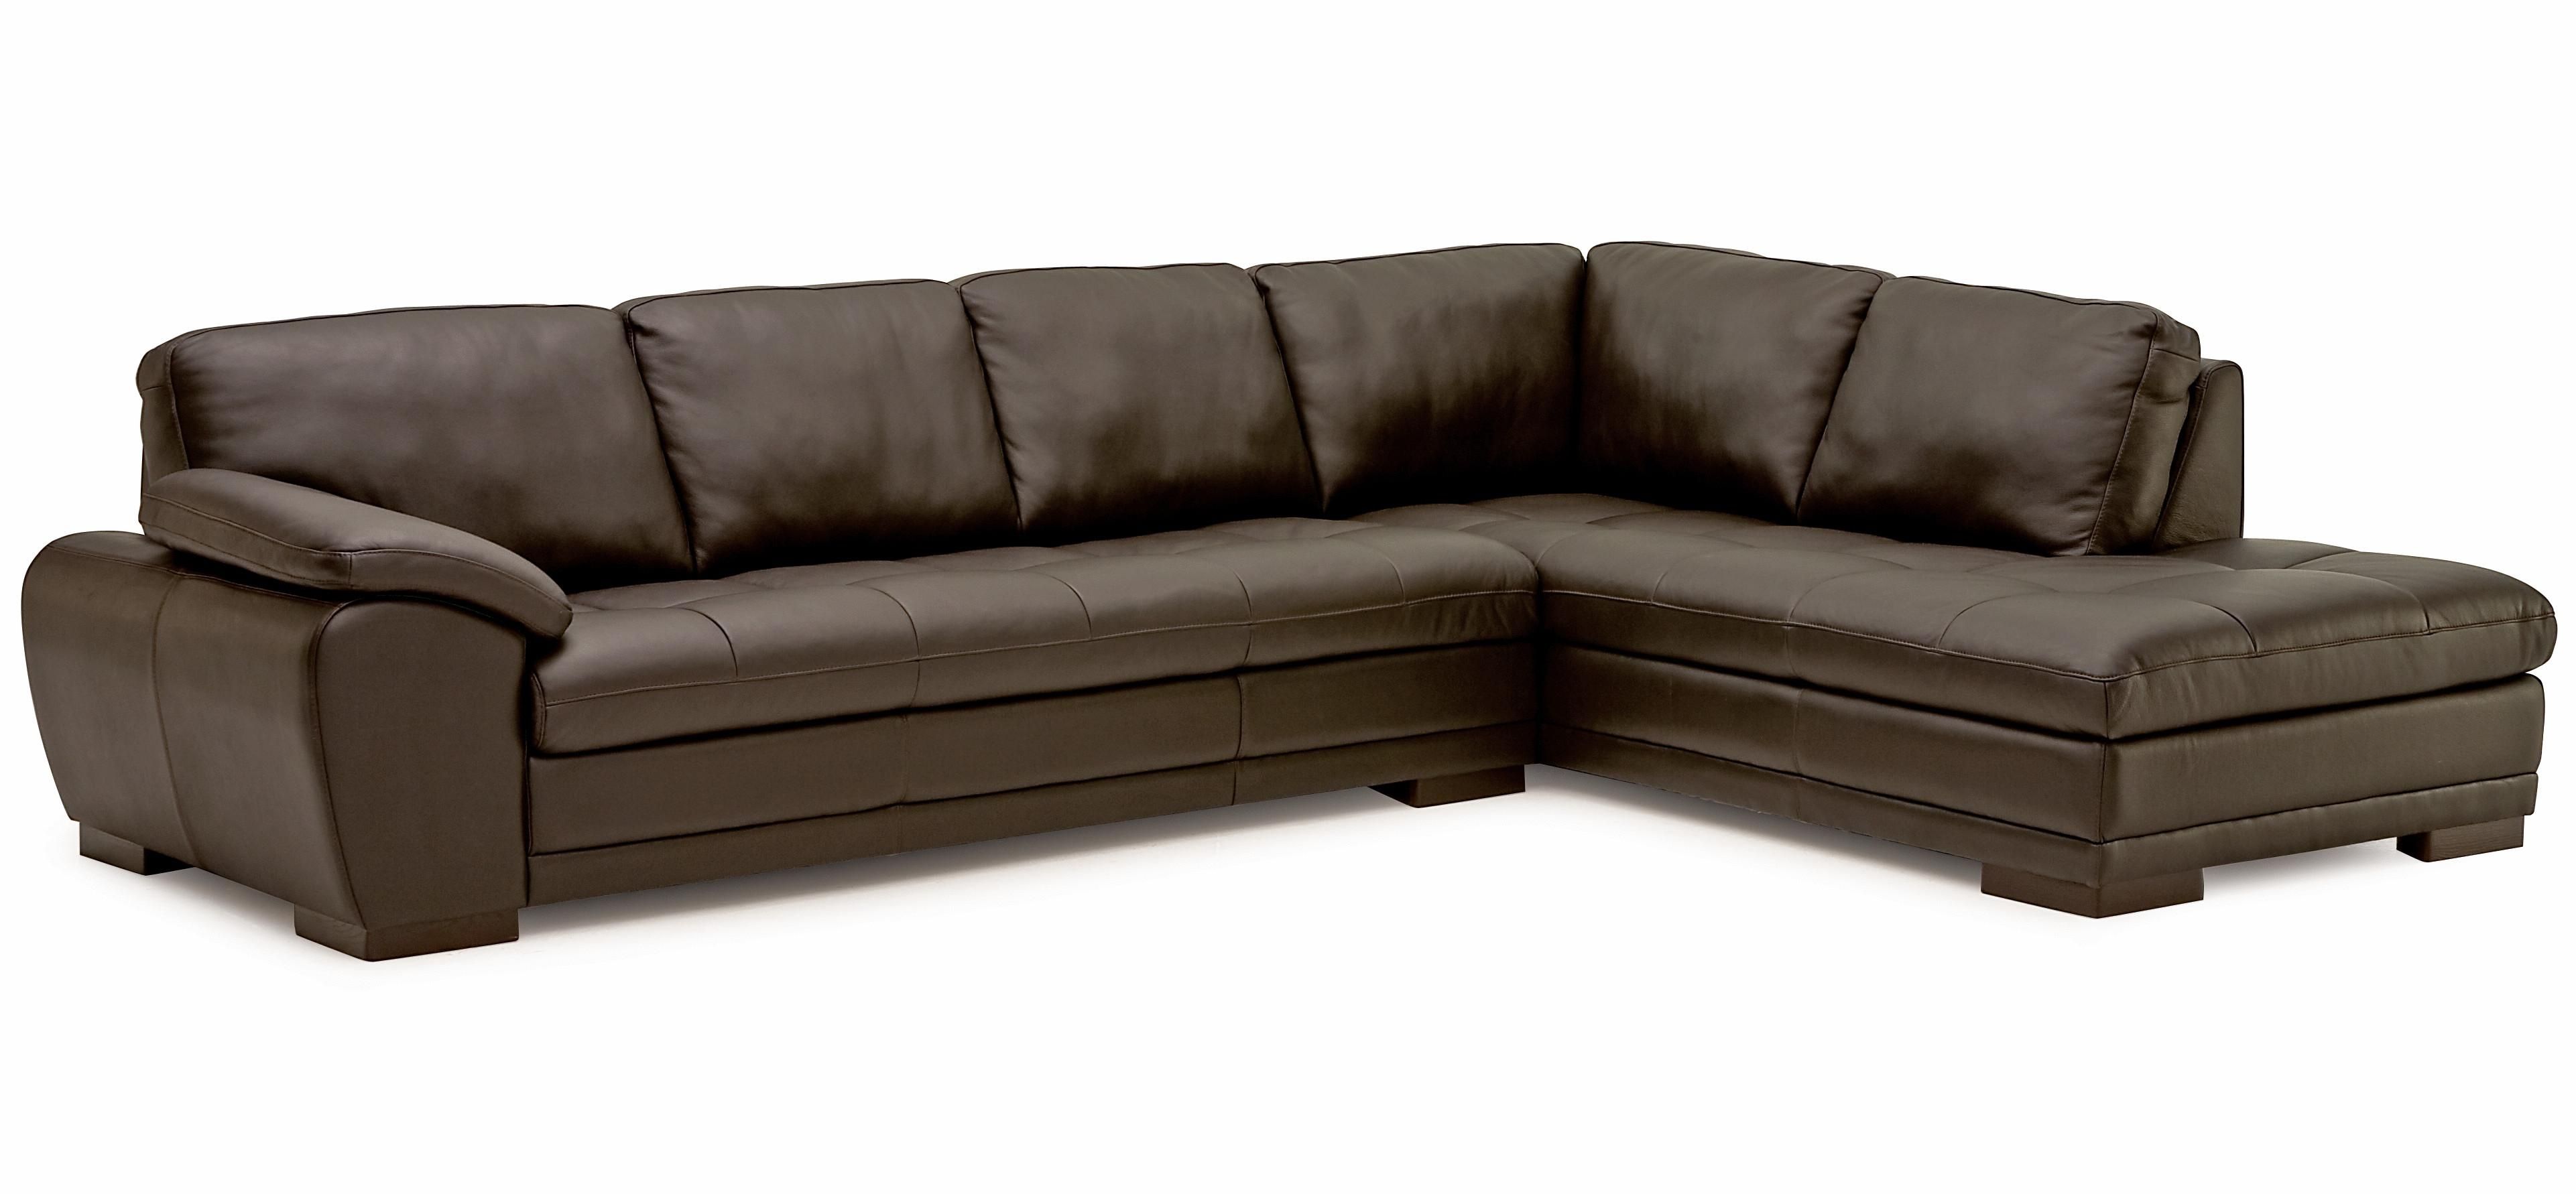 Palliser Miami Contemporary 2 Piece Sectional Sofa With Right Facing With Regard To Miami Sectional Sofas (View 3 of 10)